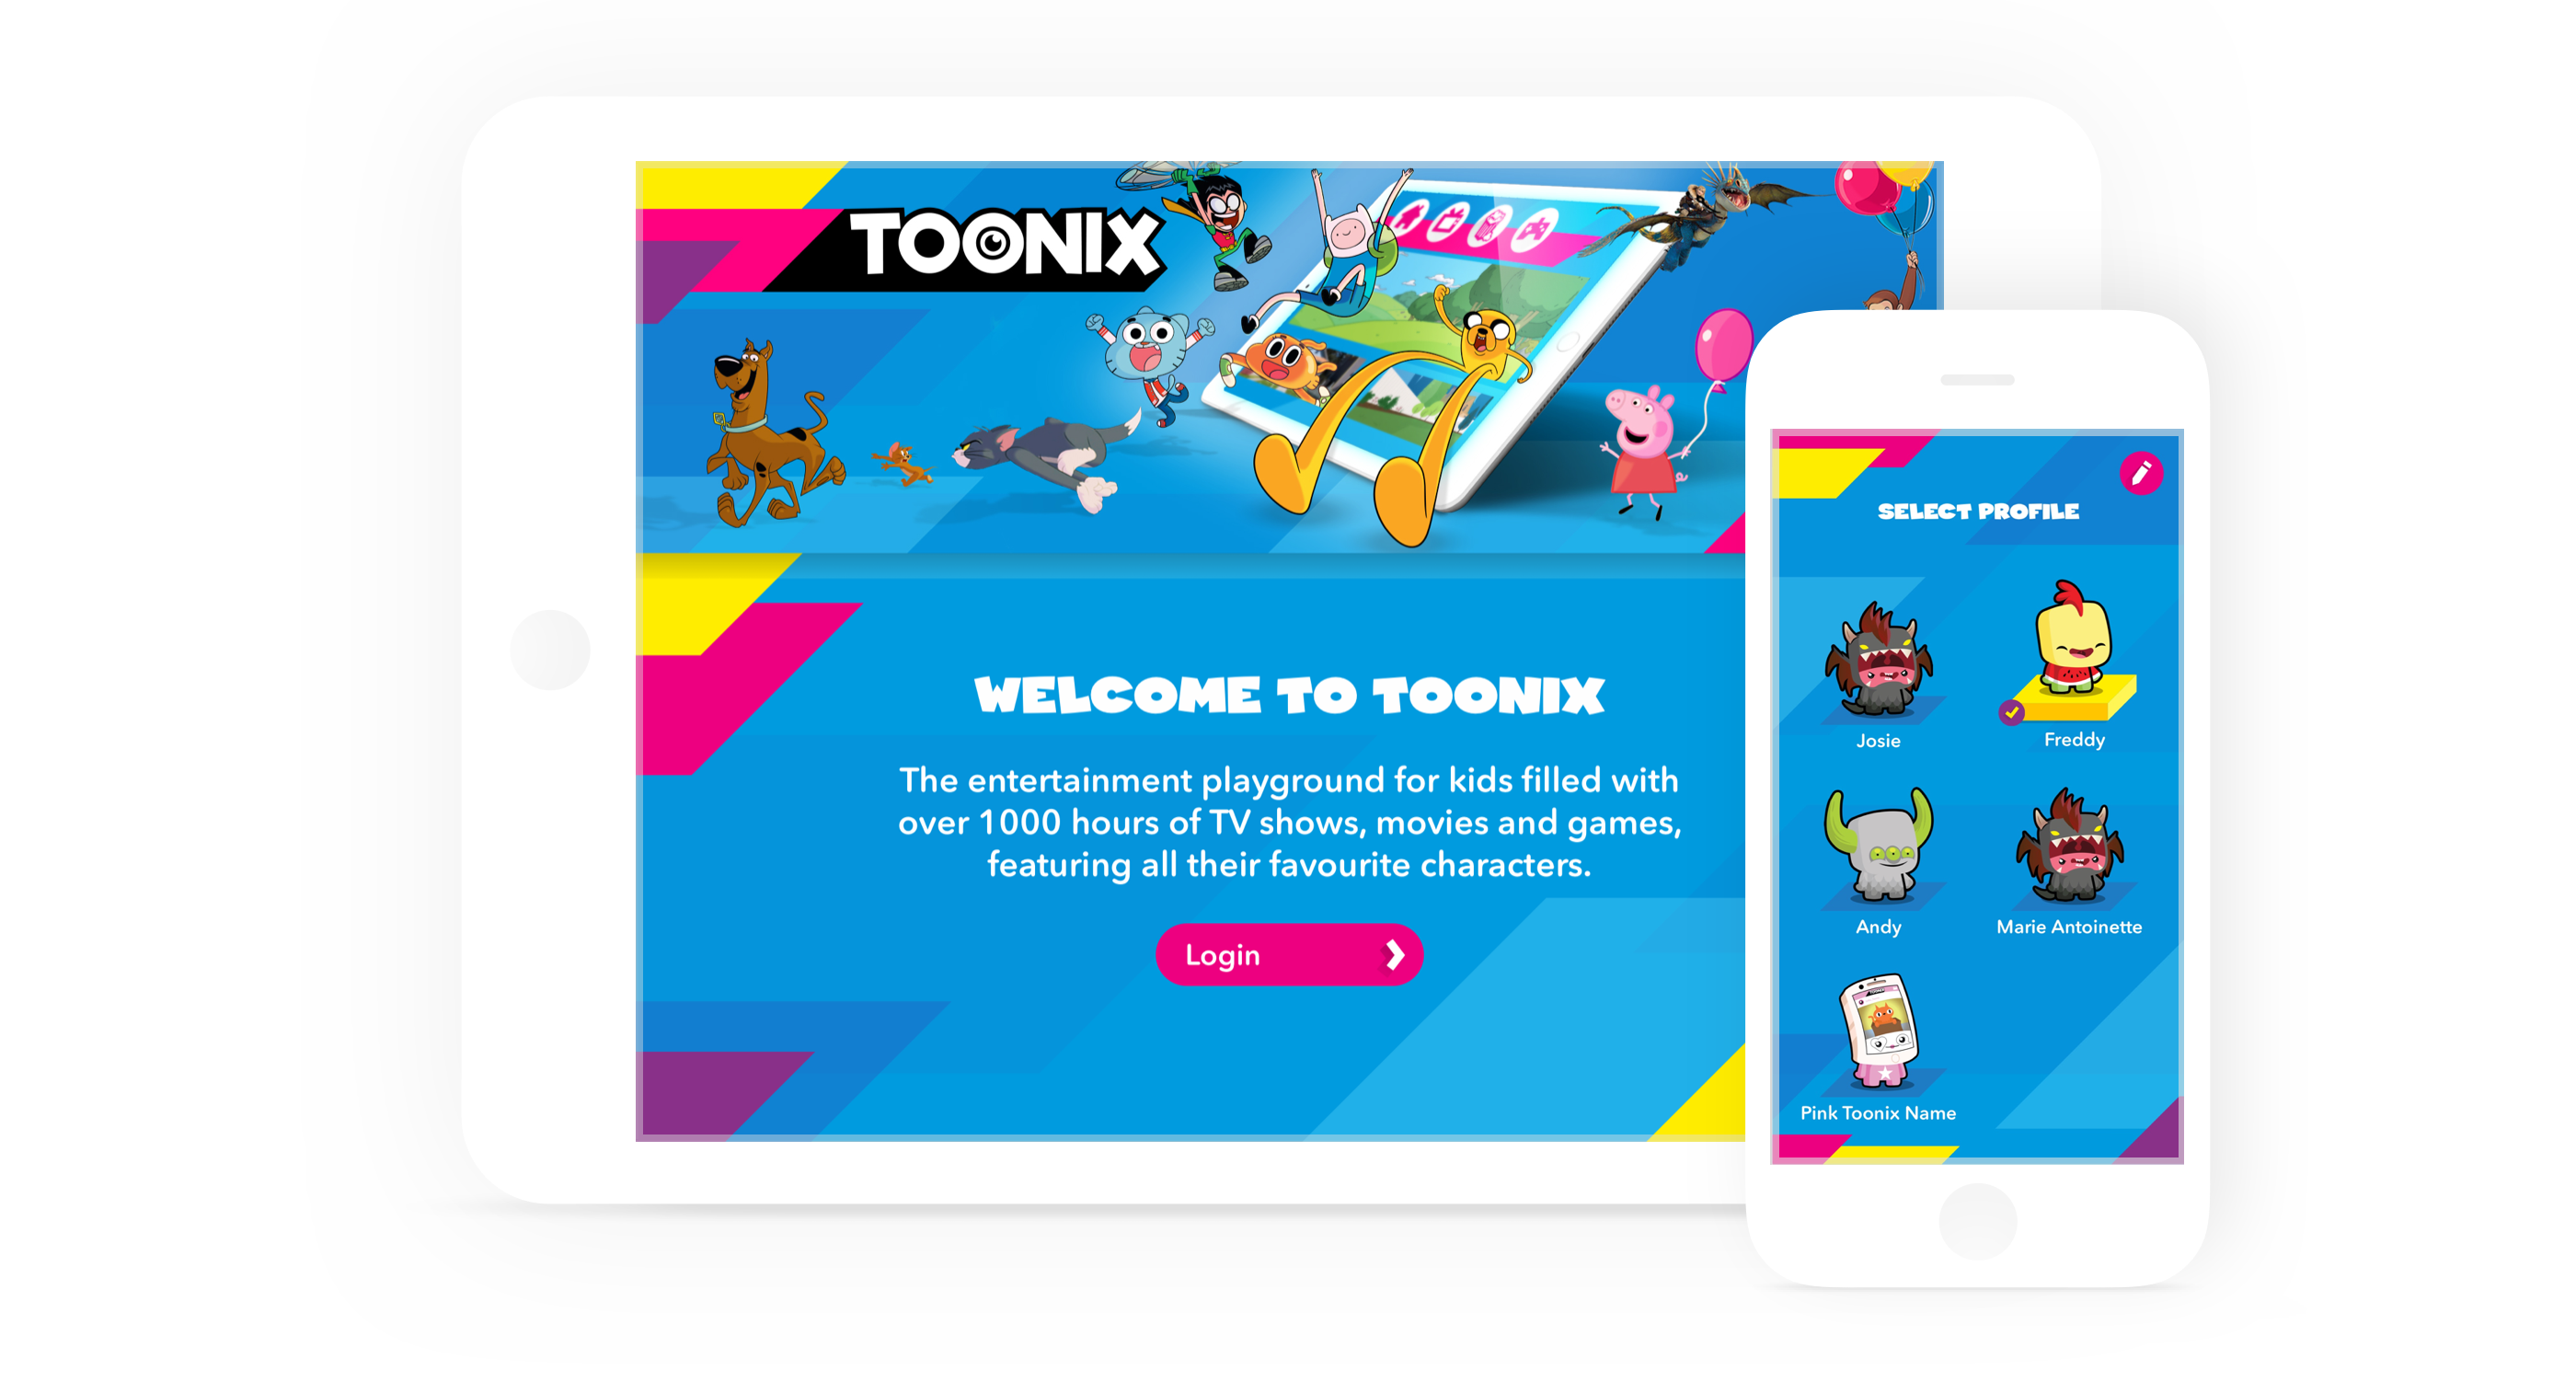 iPad and iPhone with Toonix welcome screen